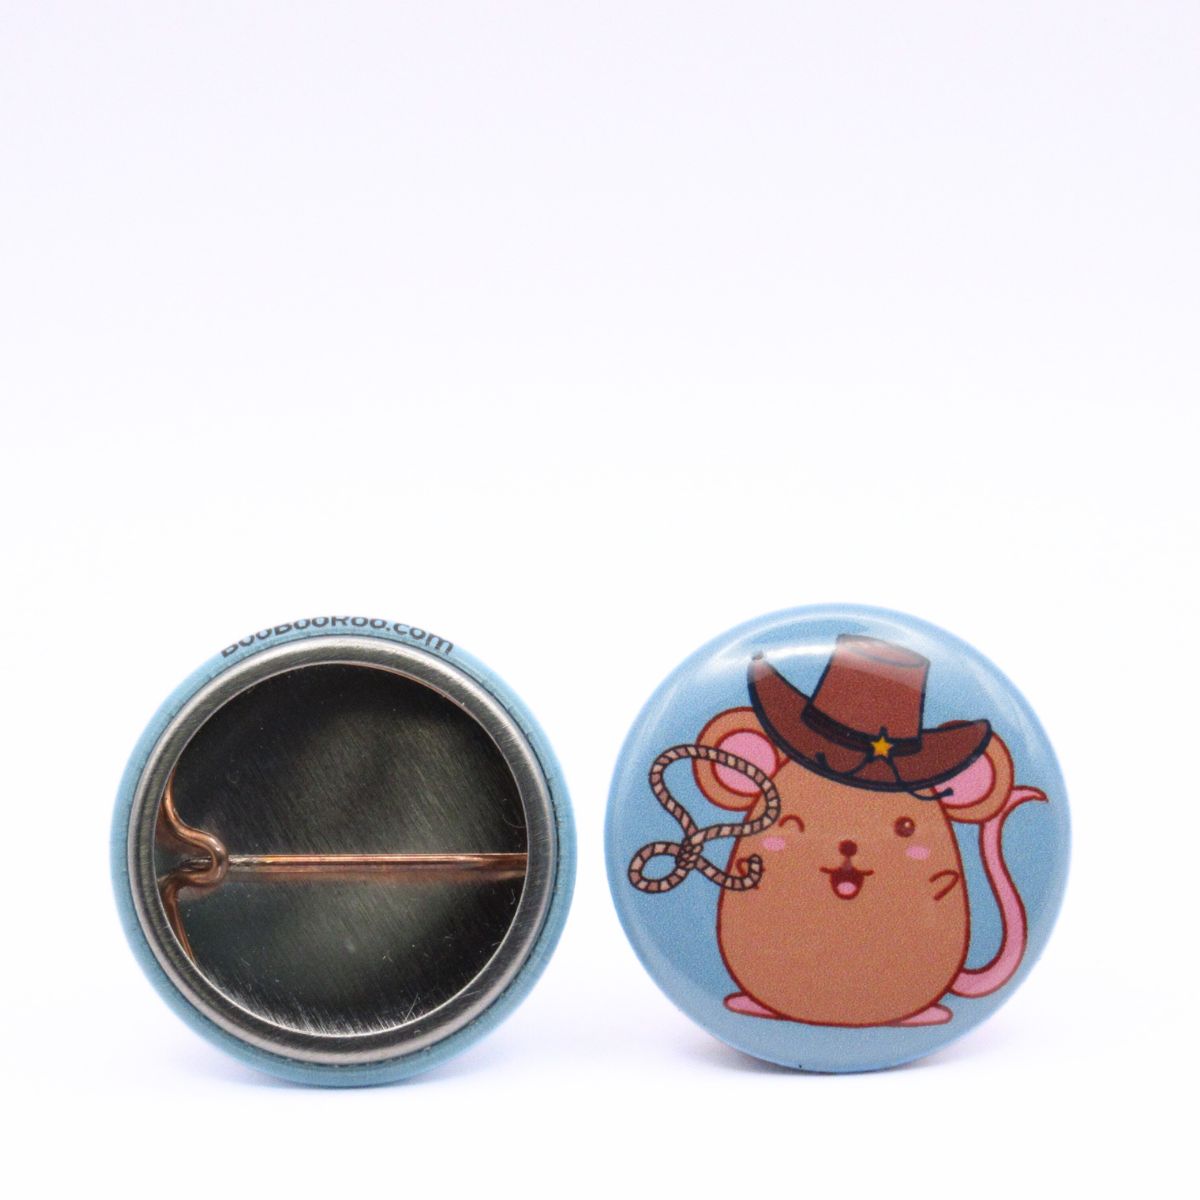 BooBooRoo Pinback Button (i.e. button, badge, pin) displaying a mouse with a cowboy hat and lasso. Image showing front and back of high-quality metal button.